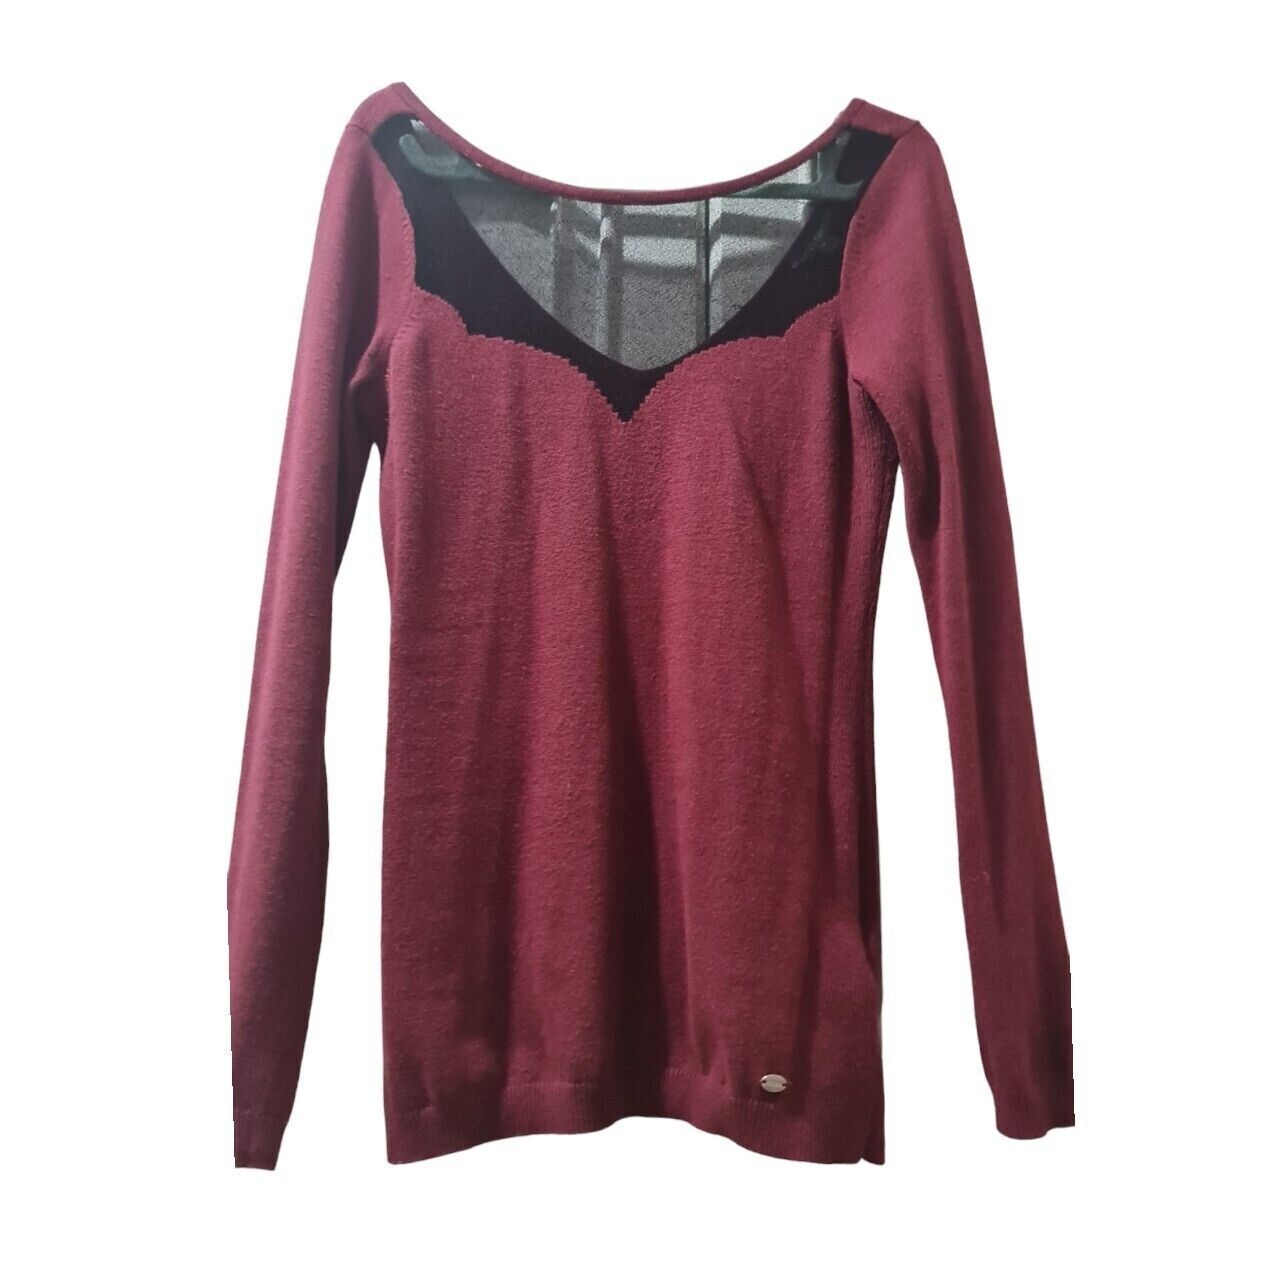 Guess Maroon Sweater